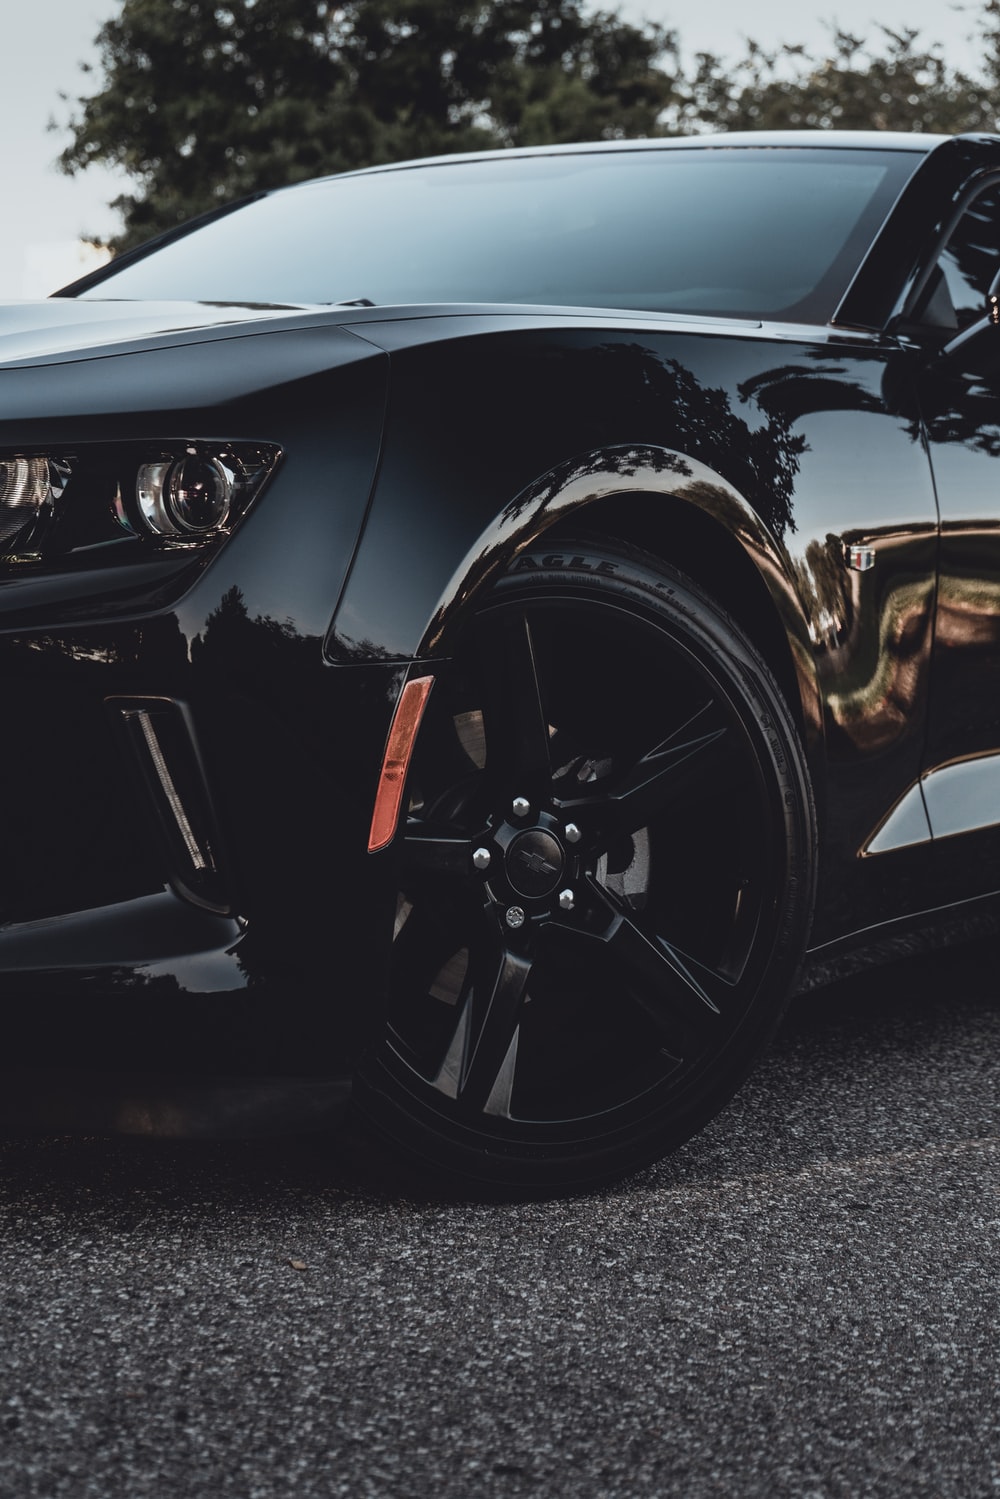 Black Car Picture [HD]. Download Free Image